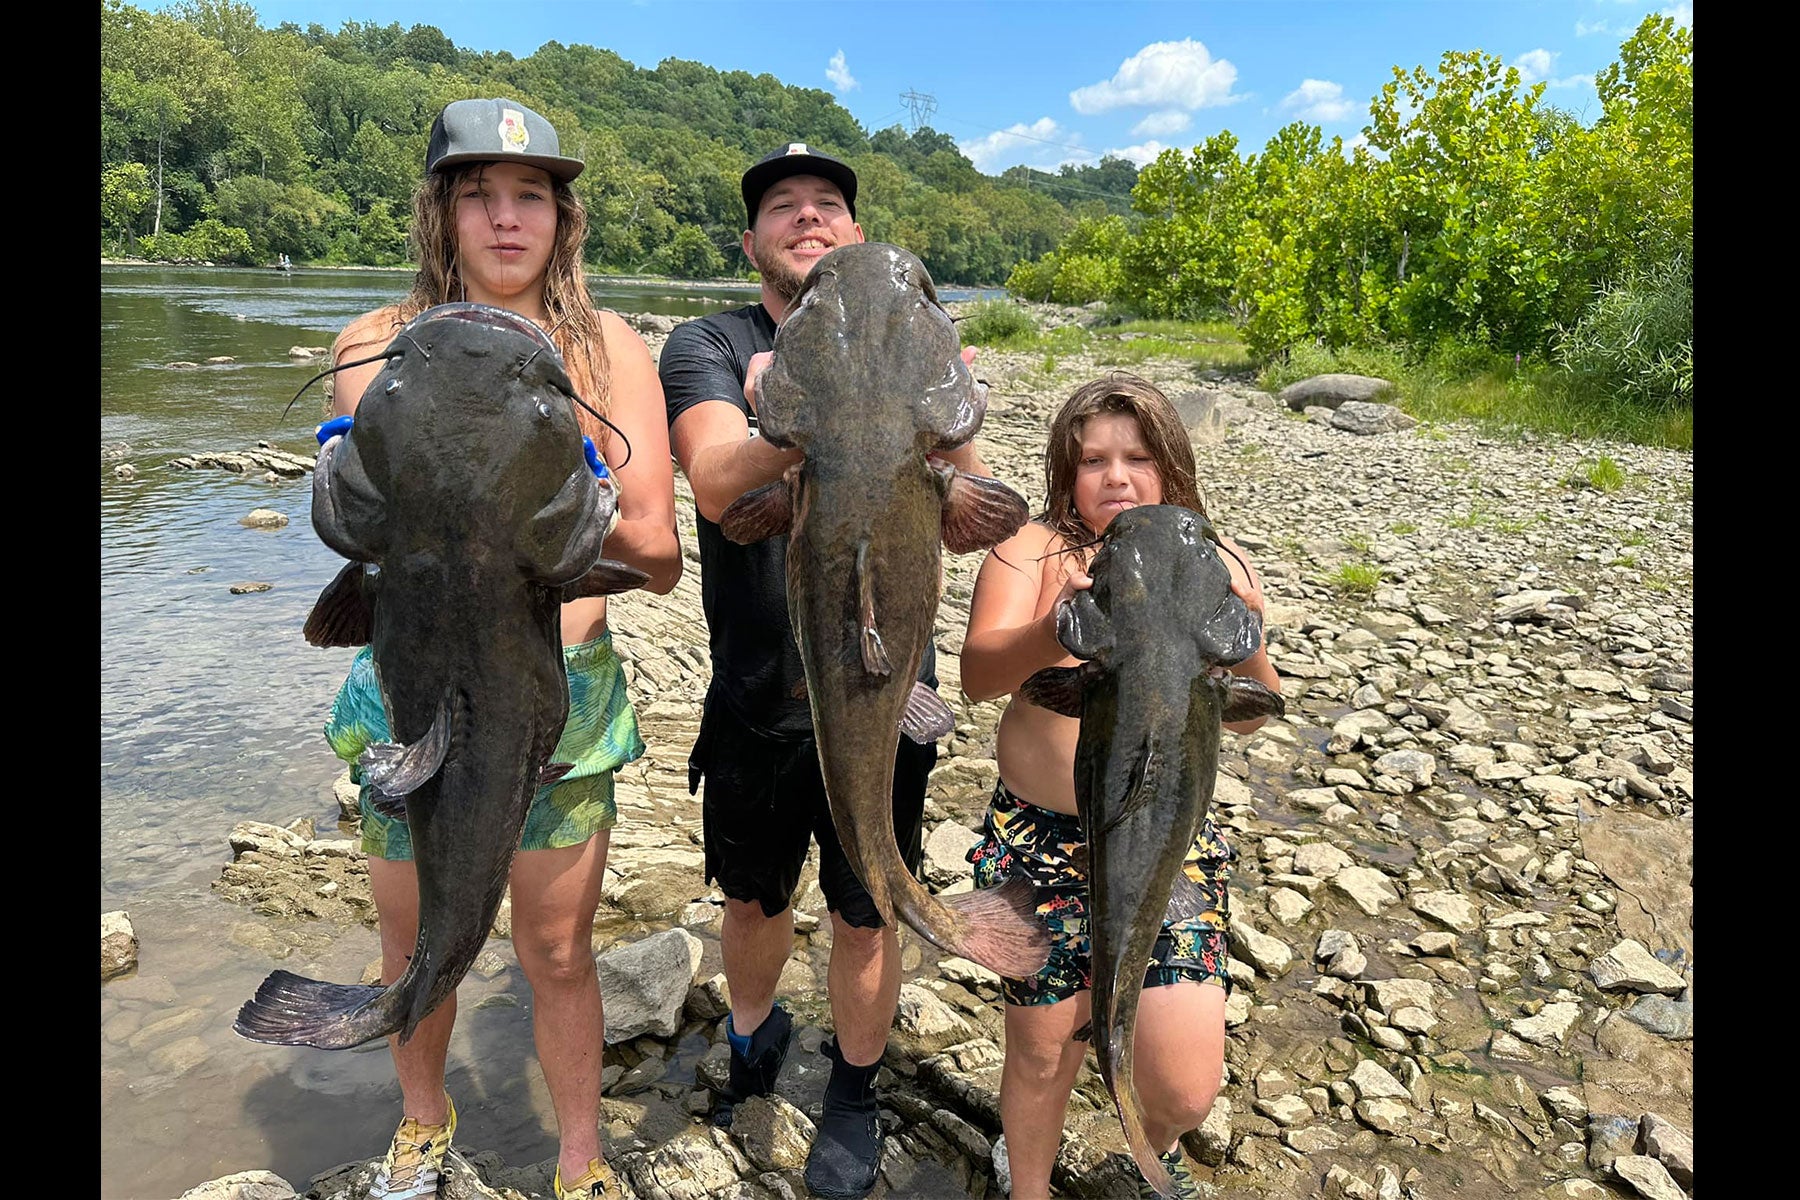 Oklahoma Family Noodles Catfish in All 17 States Where It's Legal